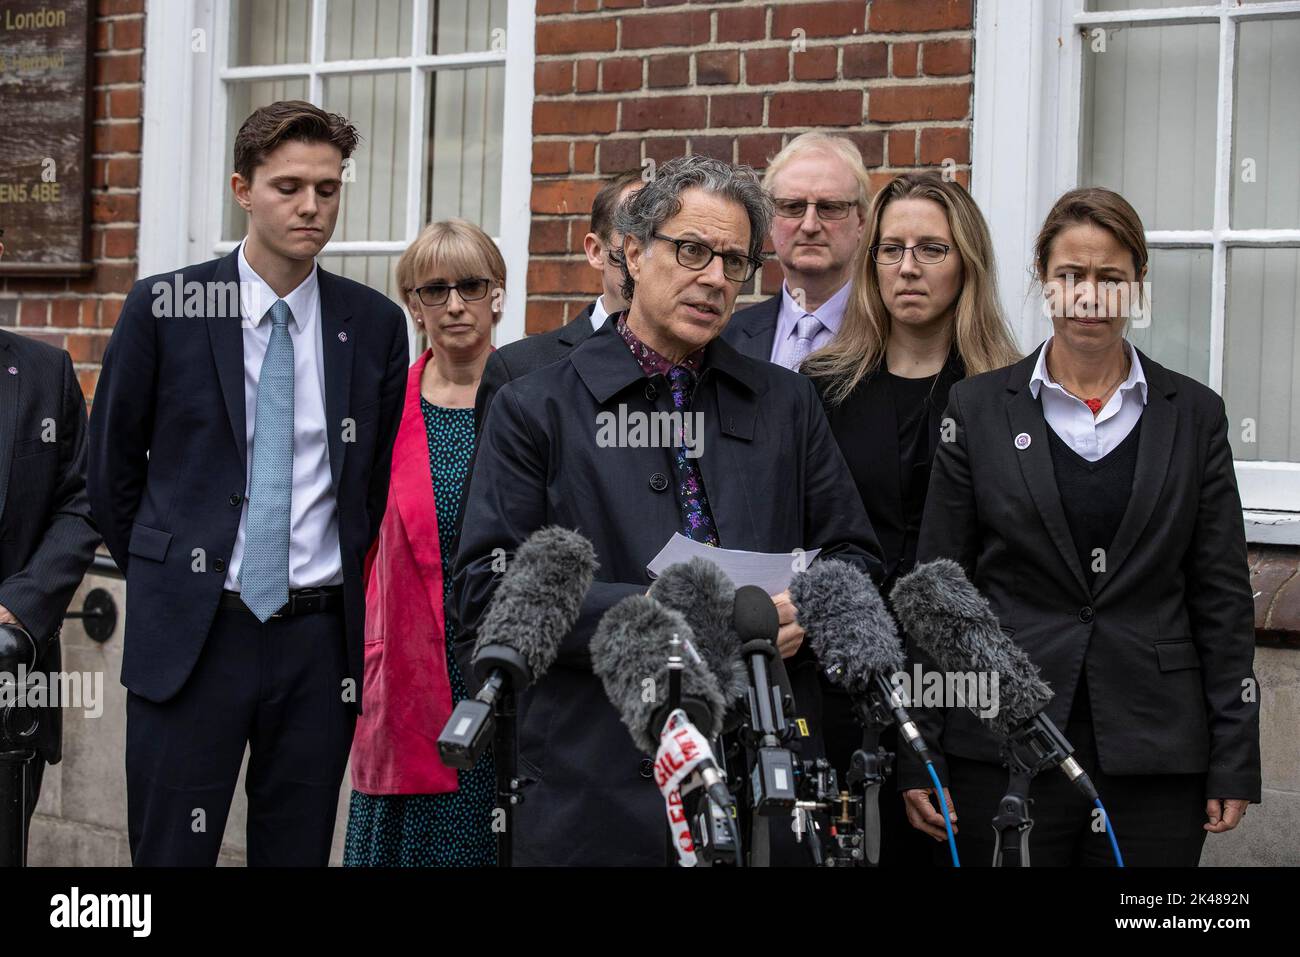 London, UK. 30th Sep, 2022. PHOTO:JEFF GILBERT 30th September 2022 Barnet, North London, UK Ian Russell (Molly's father),gives a statement at the end of the final day of the Molly Russell inquest at North London CoronoerÕs Court. Credit: Jeff Gilbert/Alamy Live News Stock Photo